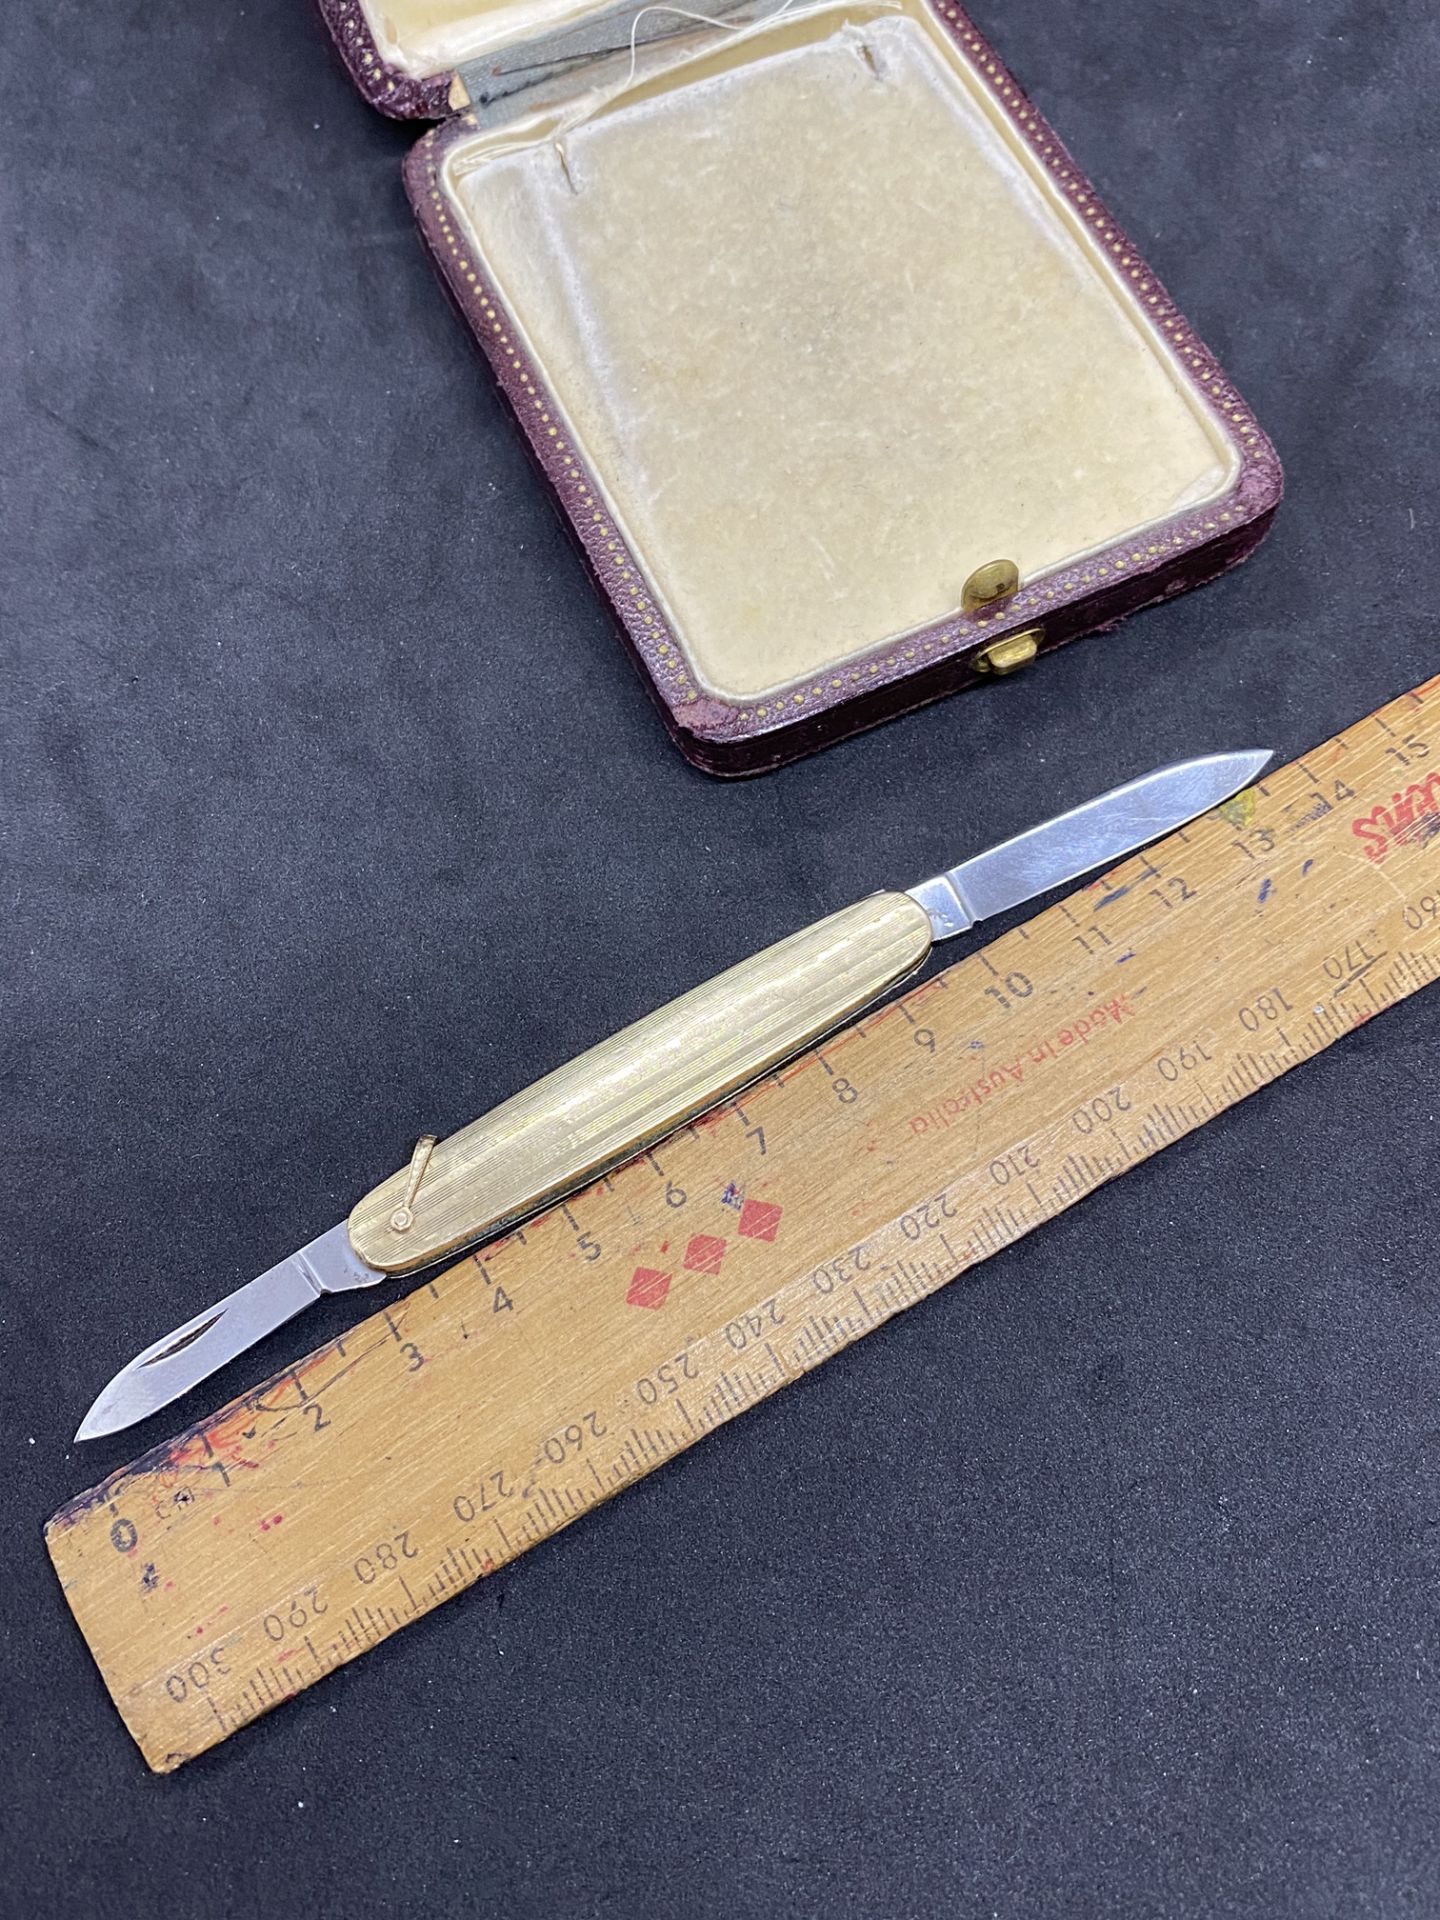 YELLOW METAL (TESTED AS 9ct GOLD) CASED PENKNIFE - STAINLESS STEEL BLADES - Image 5 of 5